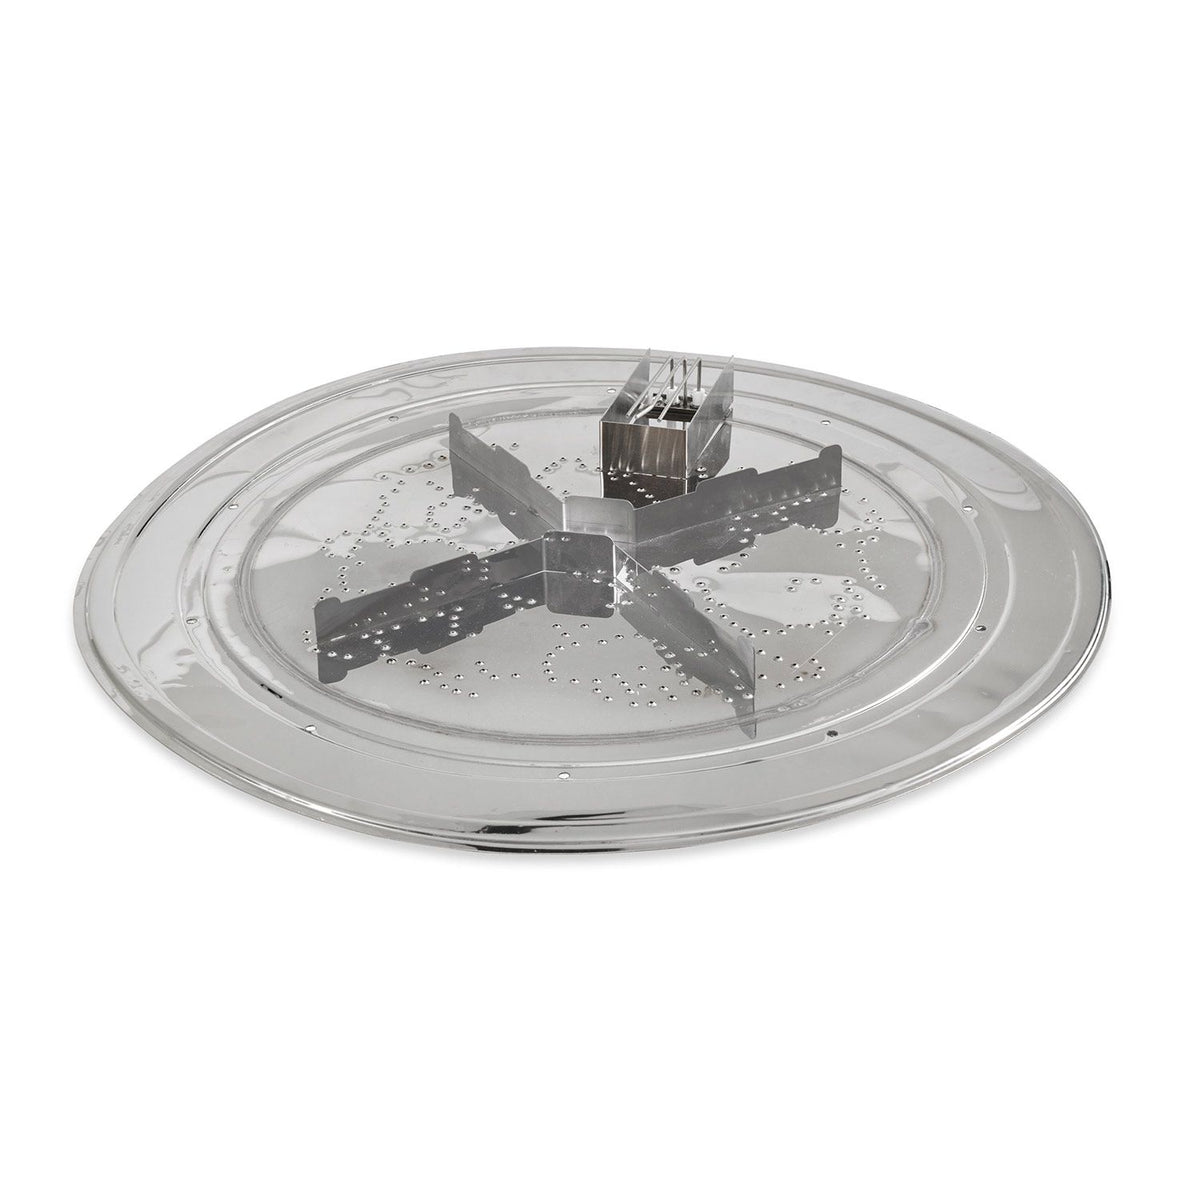 The Outdoor GreatRoom Round Stainless Steel Gas Burner Insert w/ DSI Ignition